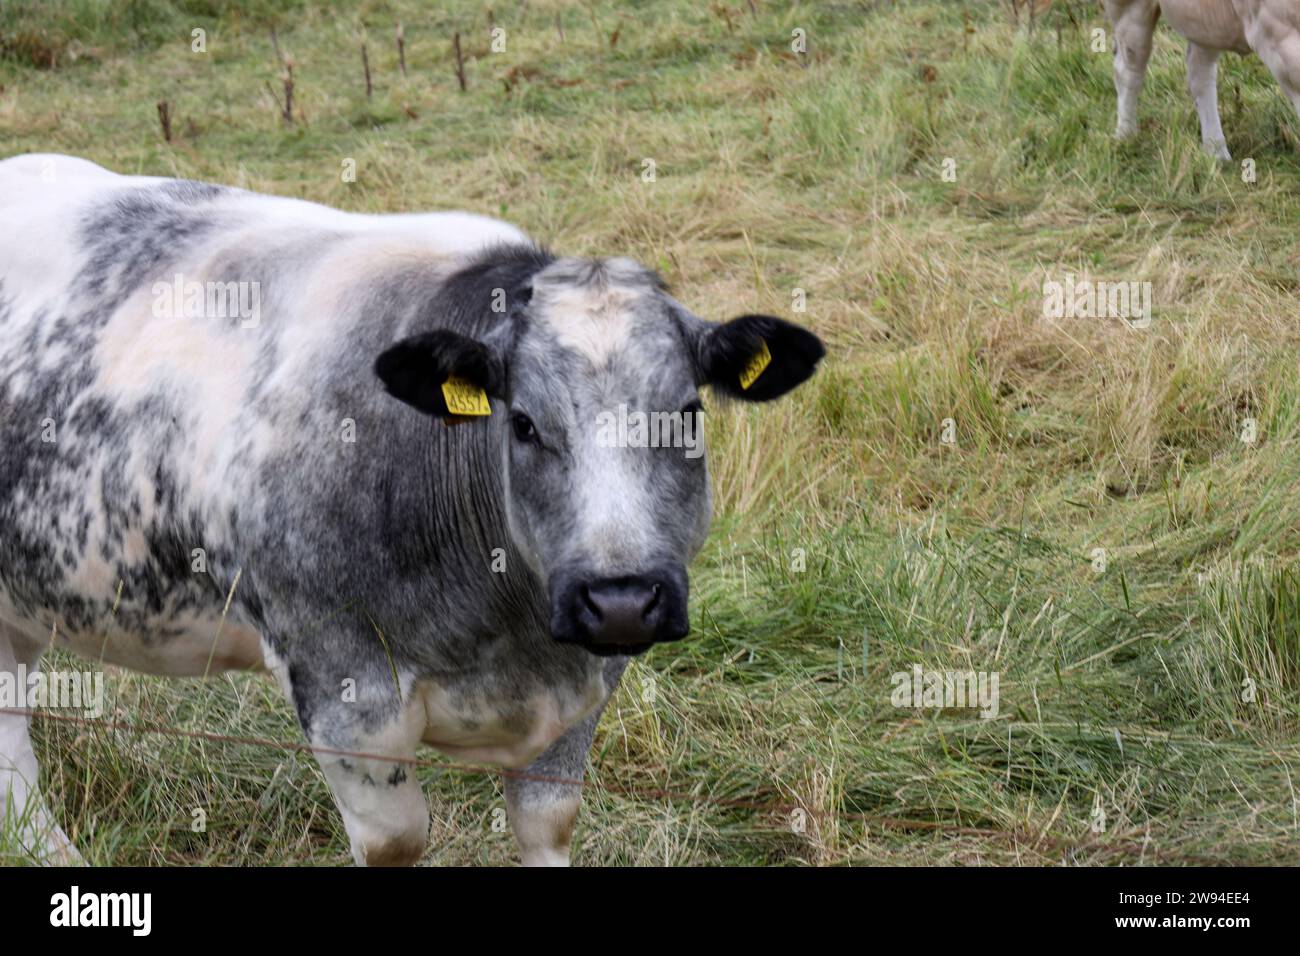 White and black Holstein Frysian cow on a meadow in the Netherlands Stock Photo